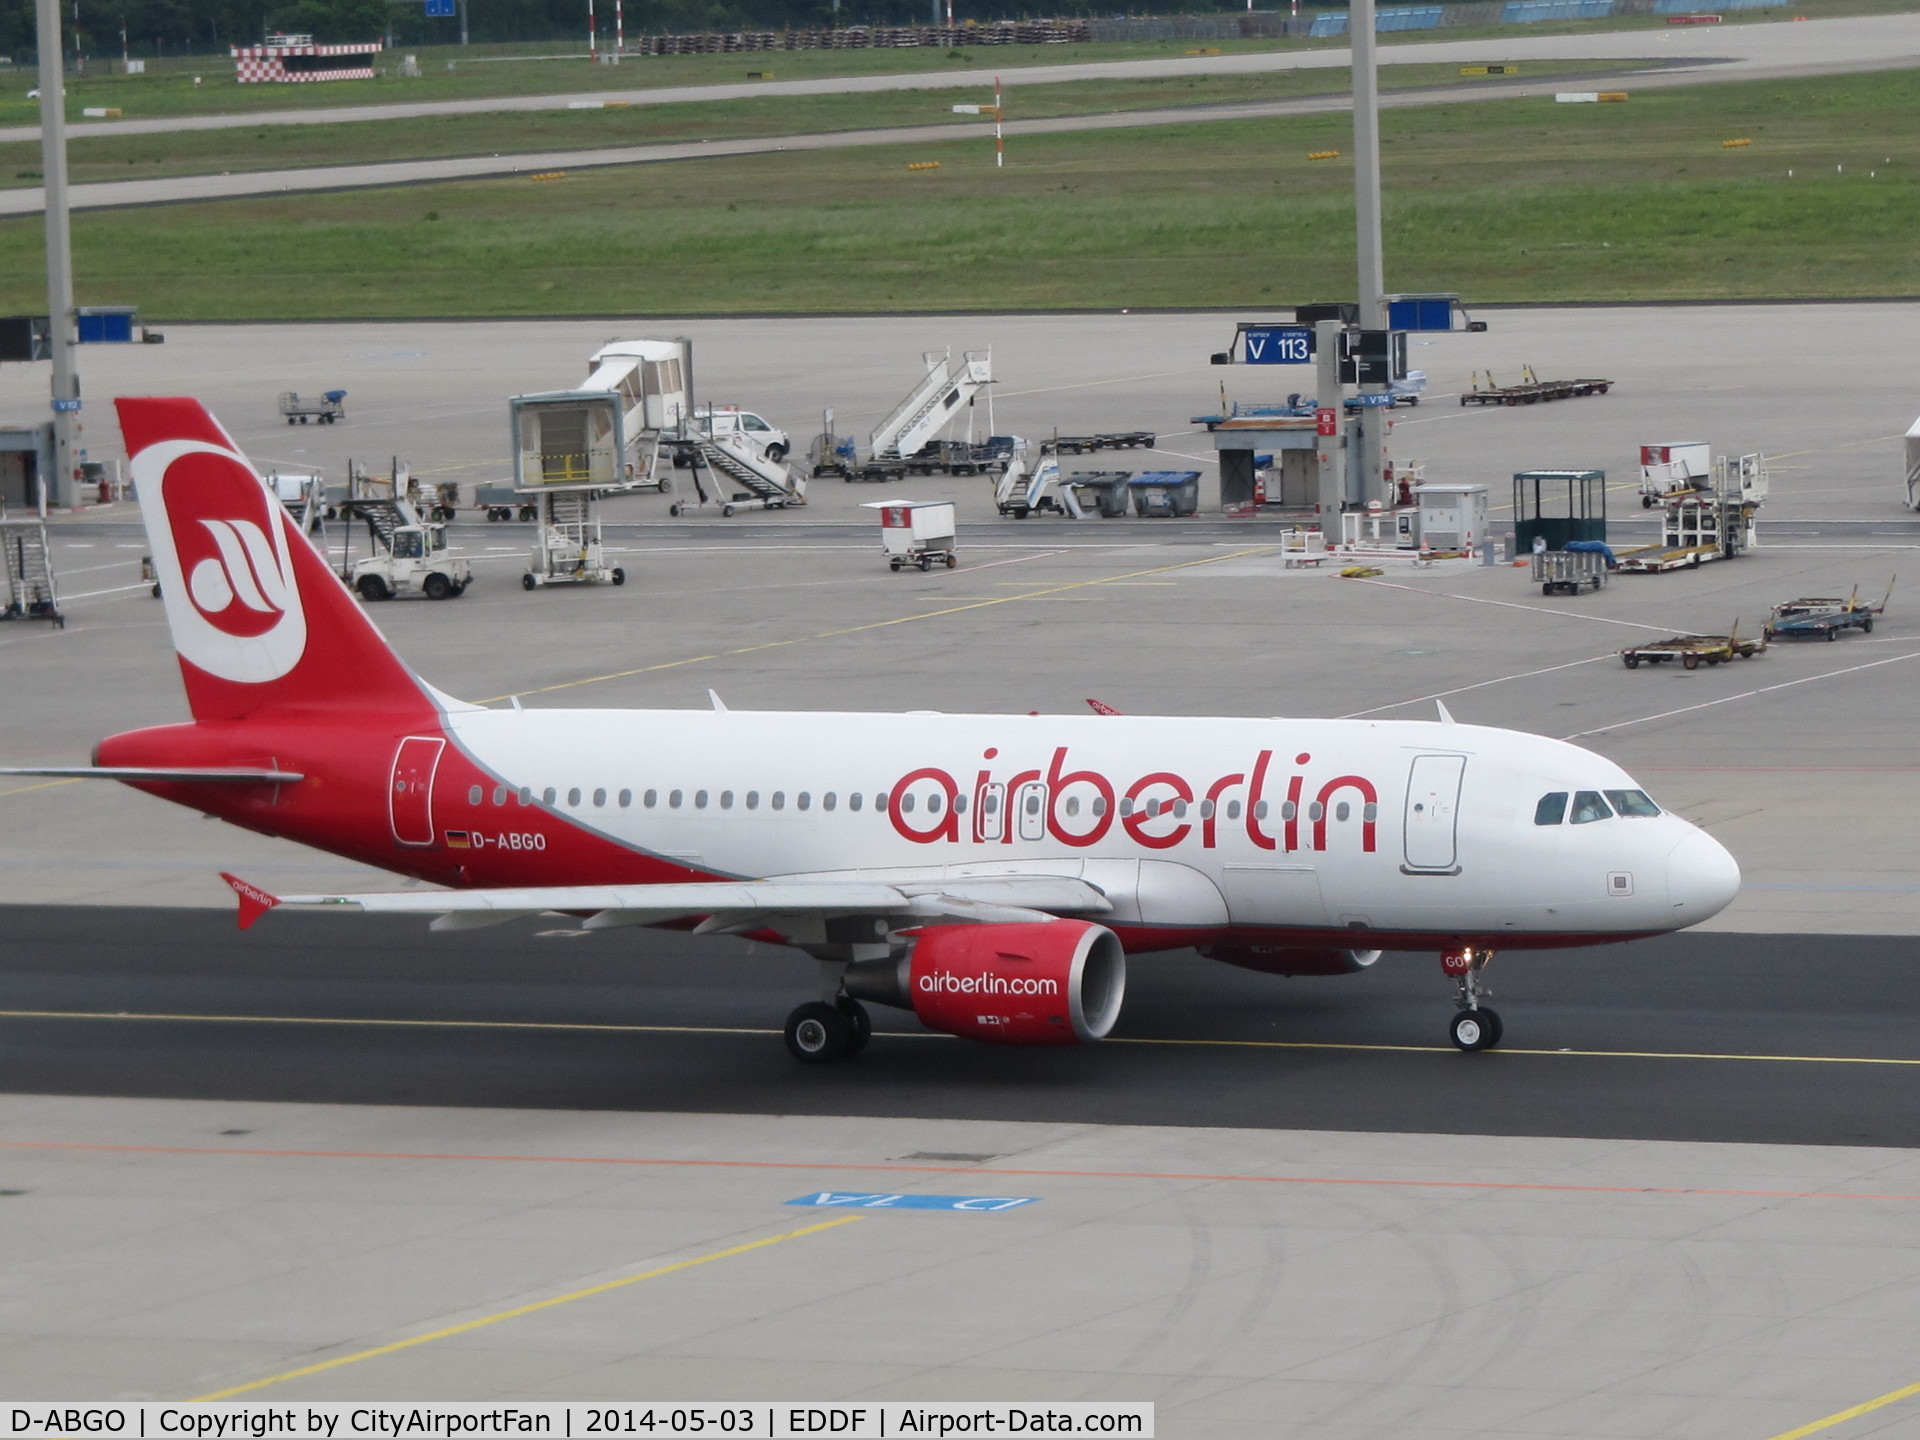 D-ABGO, 2008 Airbus A319-112 C/N 3689, taxiing to Runway